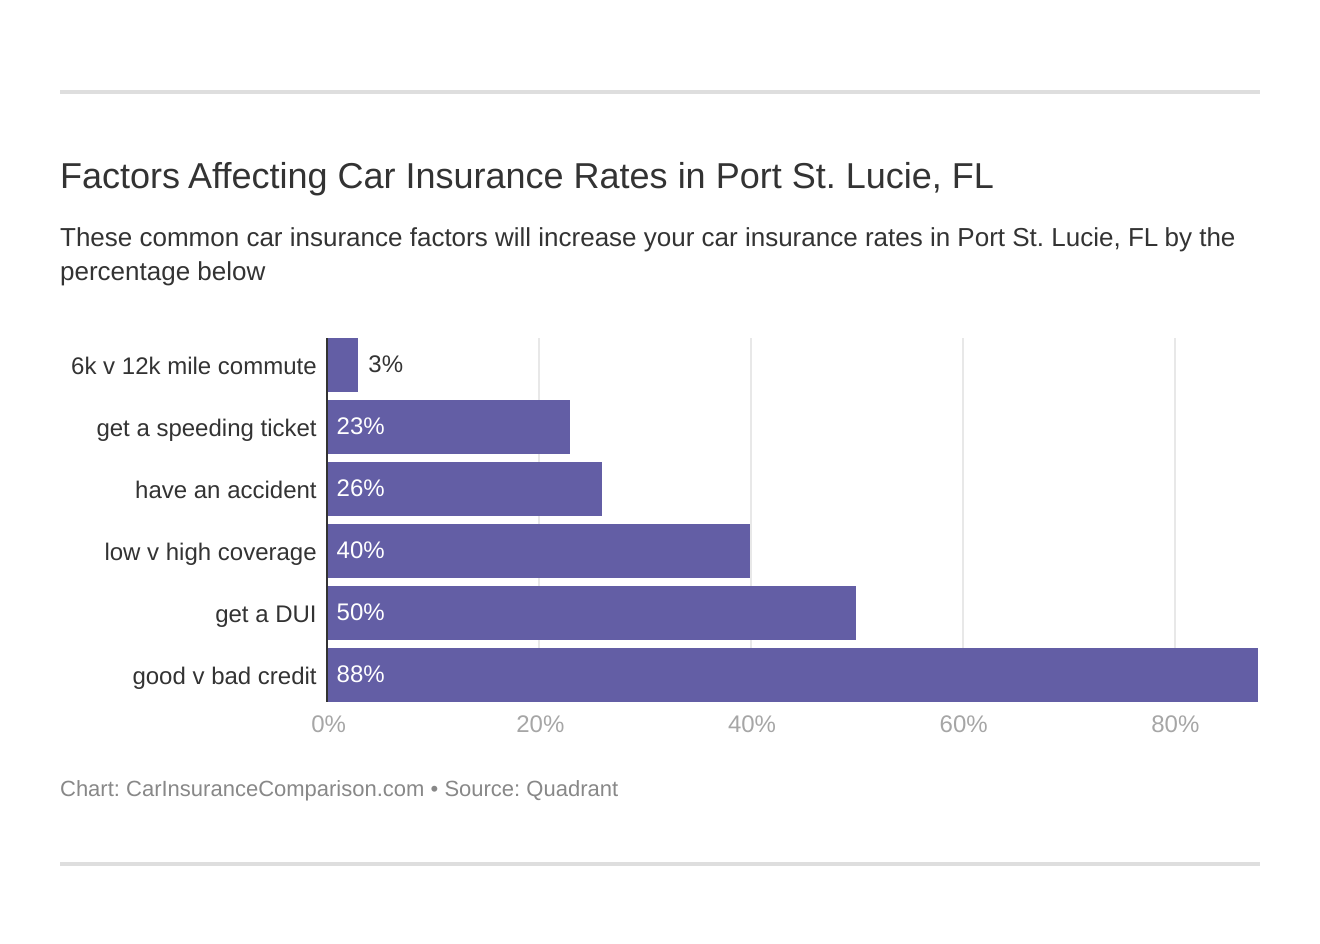 Factors Affecting Car Insurance Rates in Port St. Lucie, FL